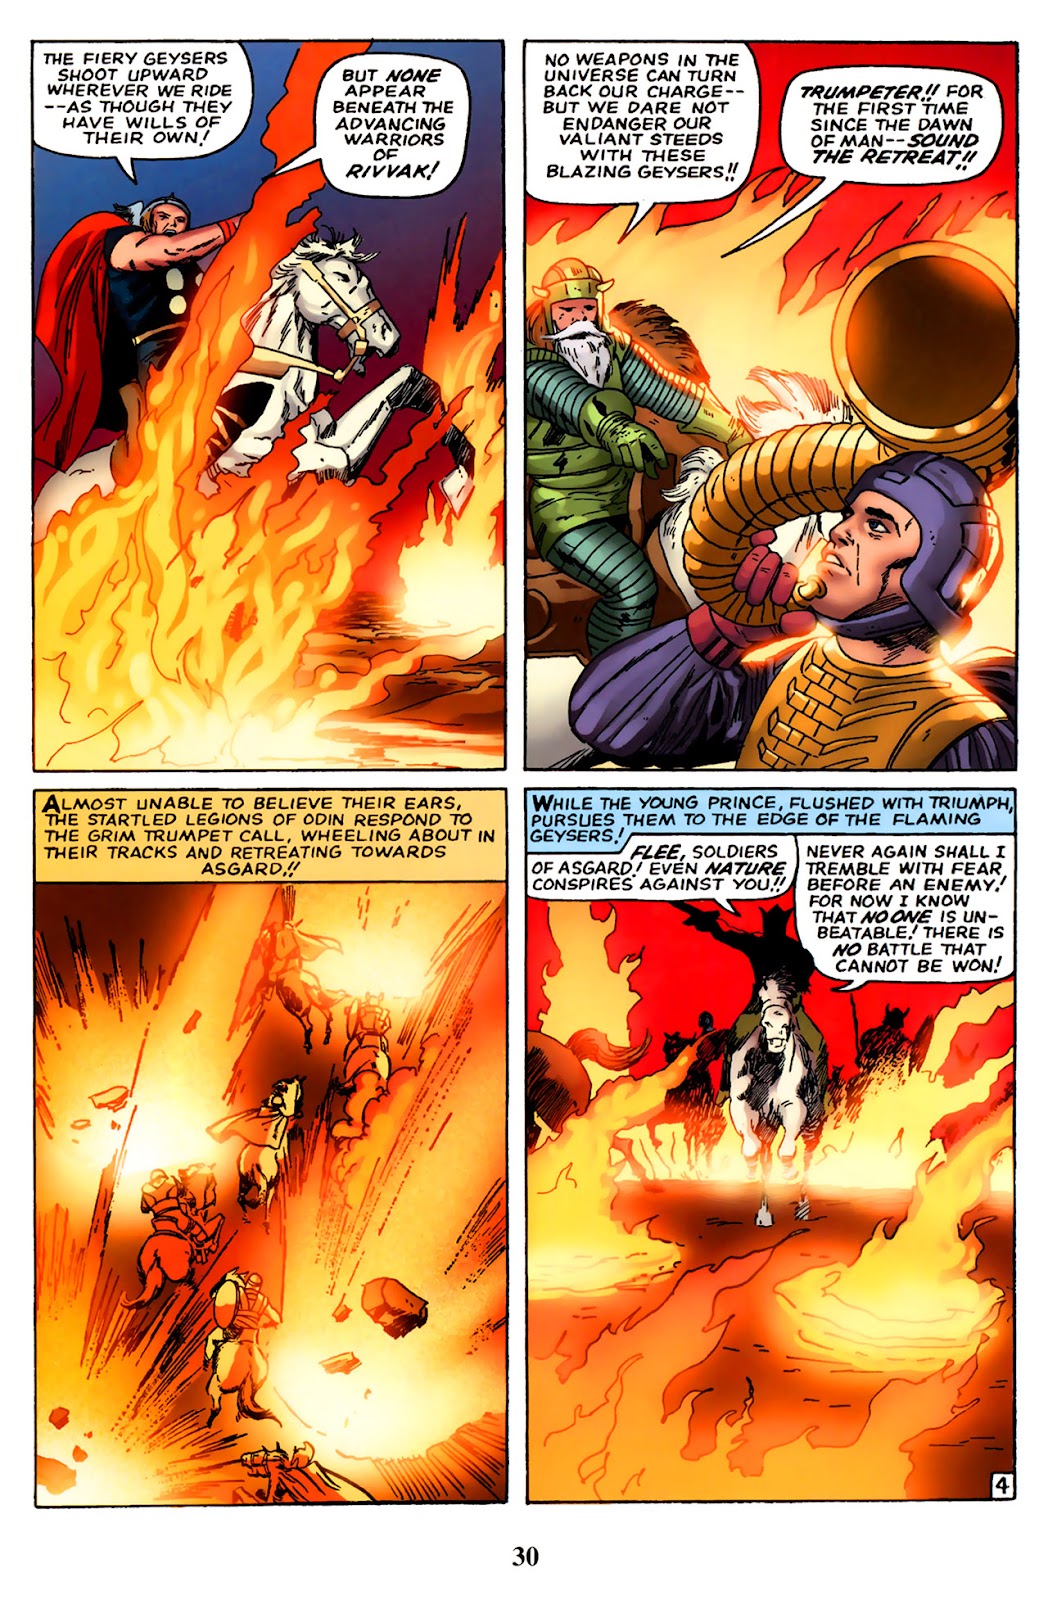 Thor: Tales of Asgard by Stan Lee & Jack Kirby issue 2 - Page 32